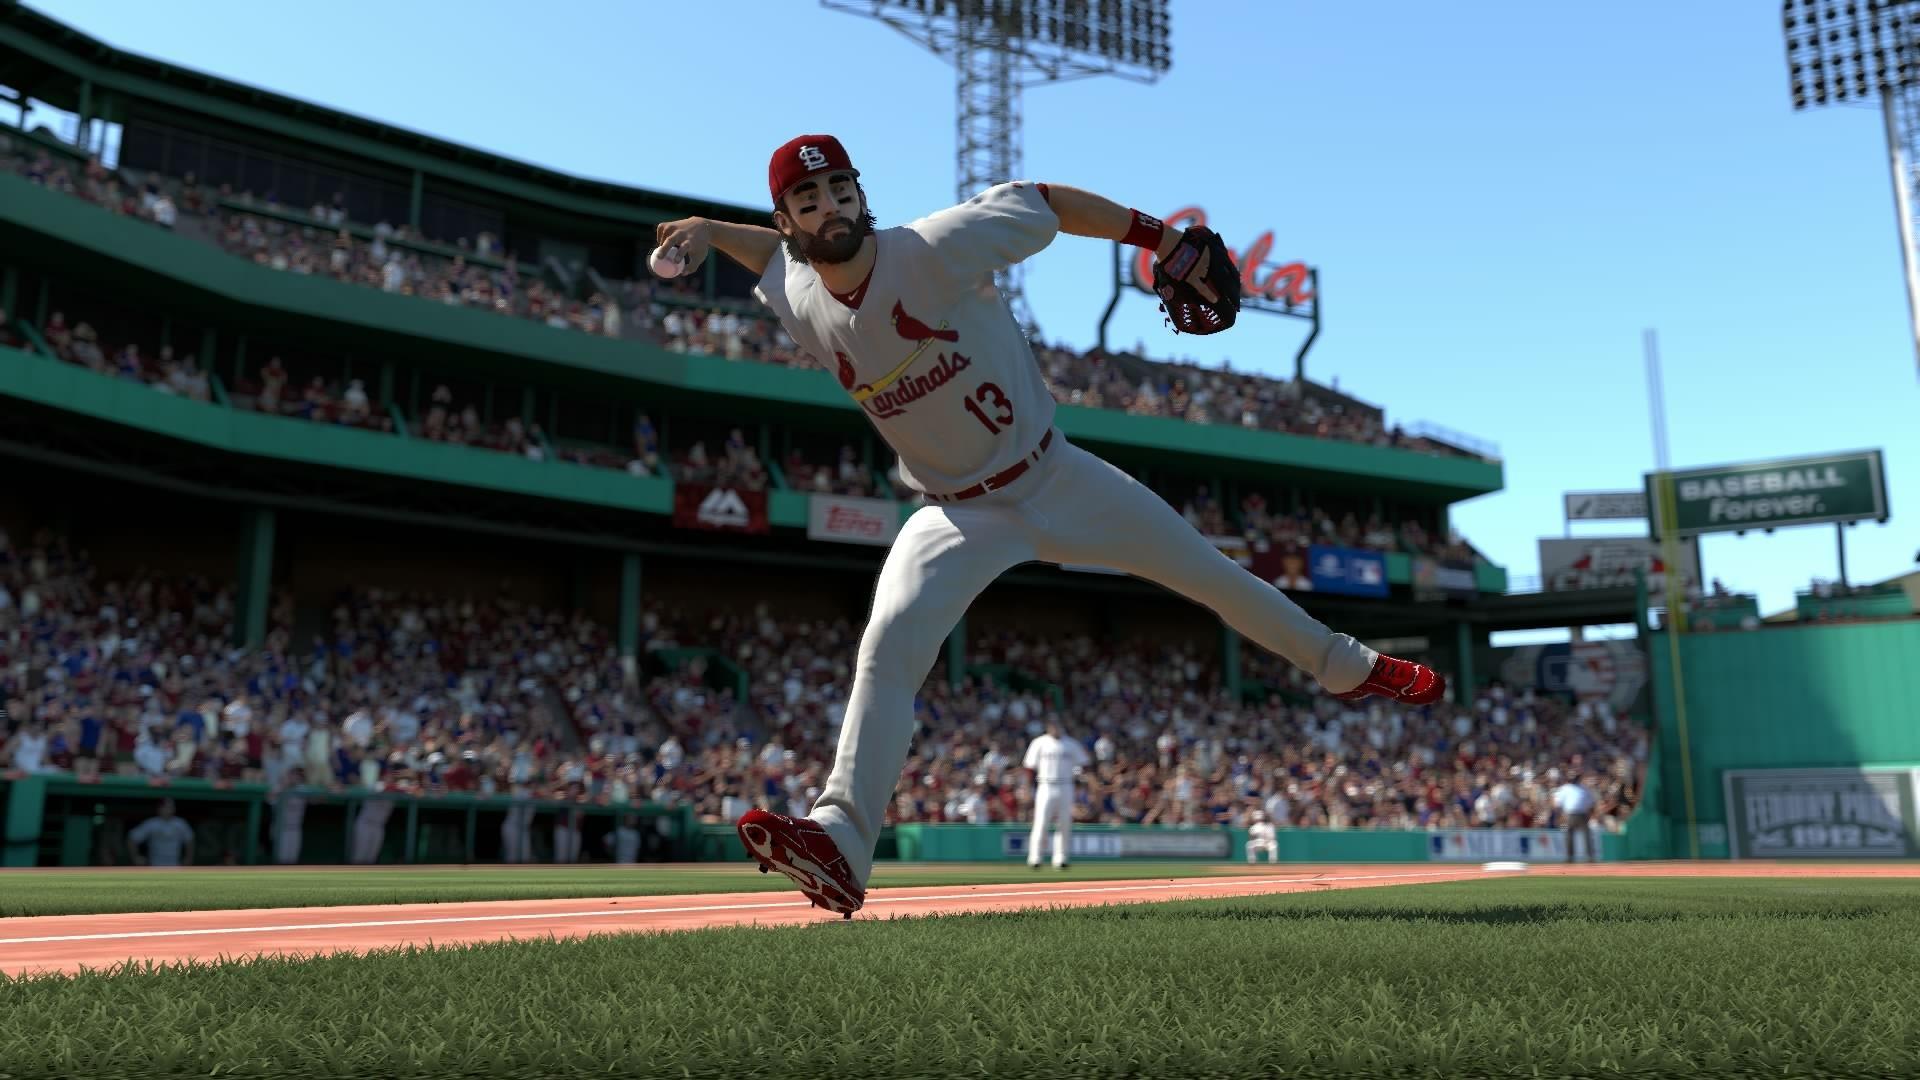 MLB The Show Wallpaper 46770 1920x1080px